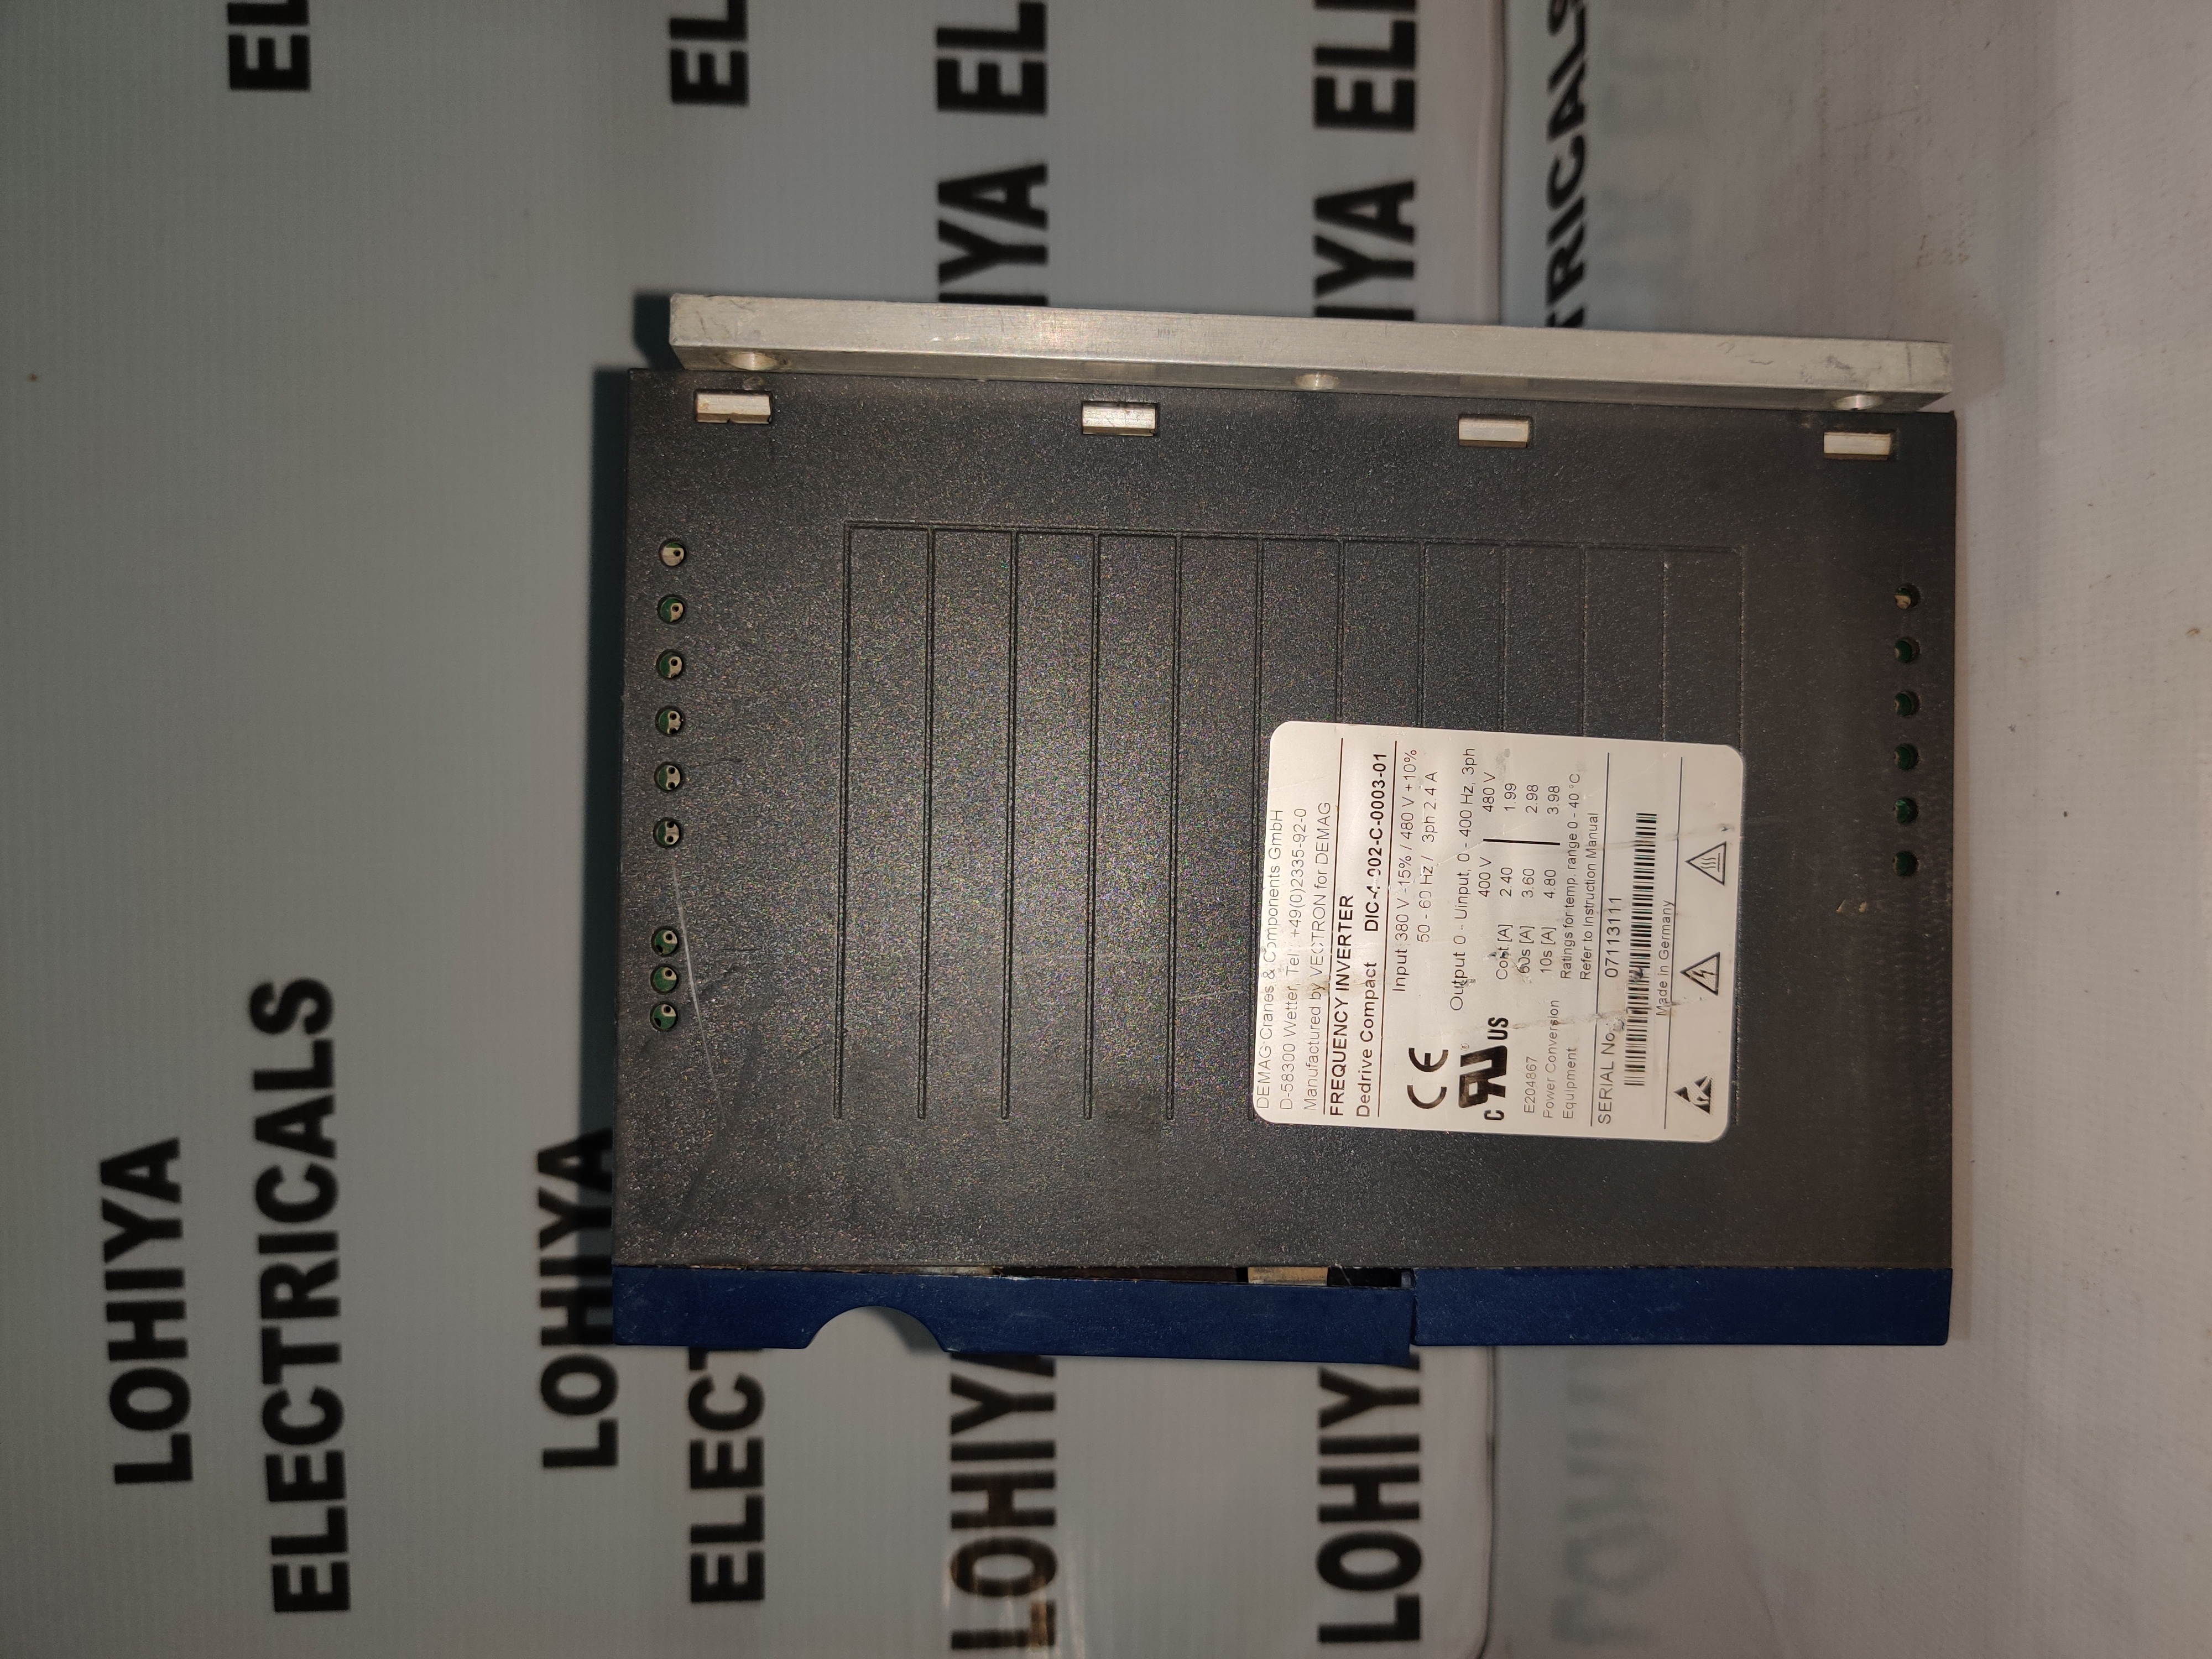 DEMAG DIC-4-002-C-0003-01 FREQUENCY INVERTER DRIVES